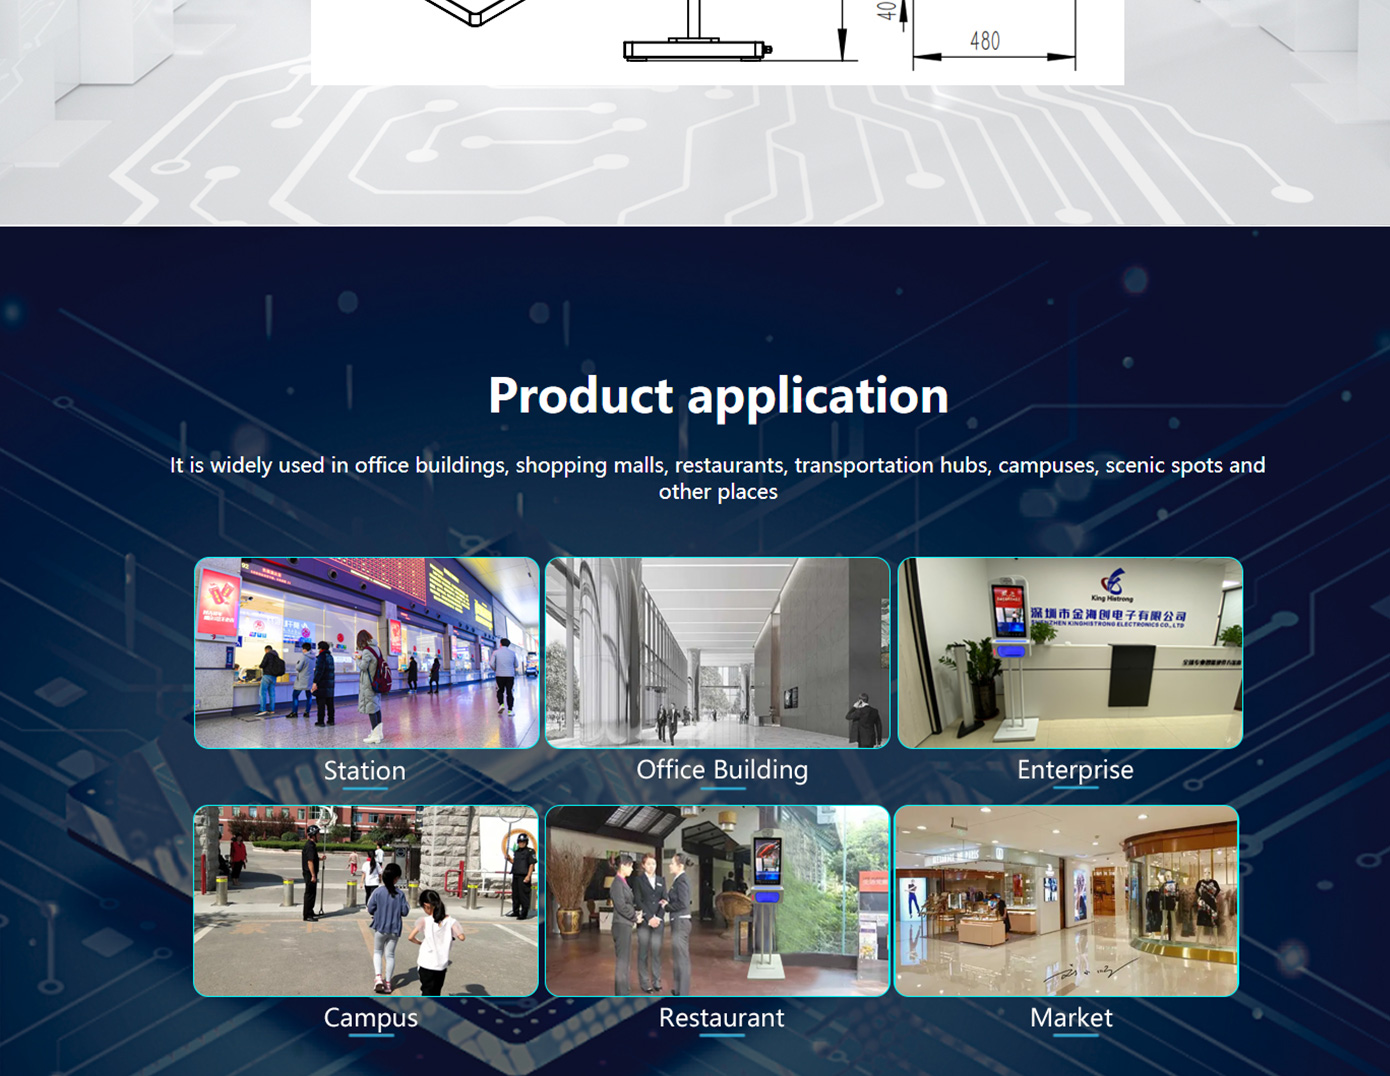 Face recognition disinfection advertising machine